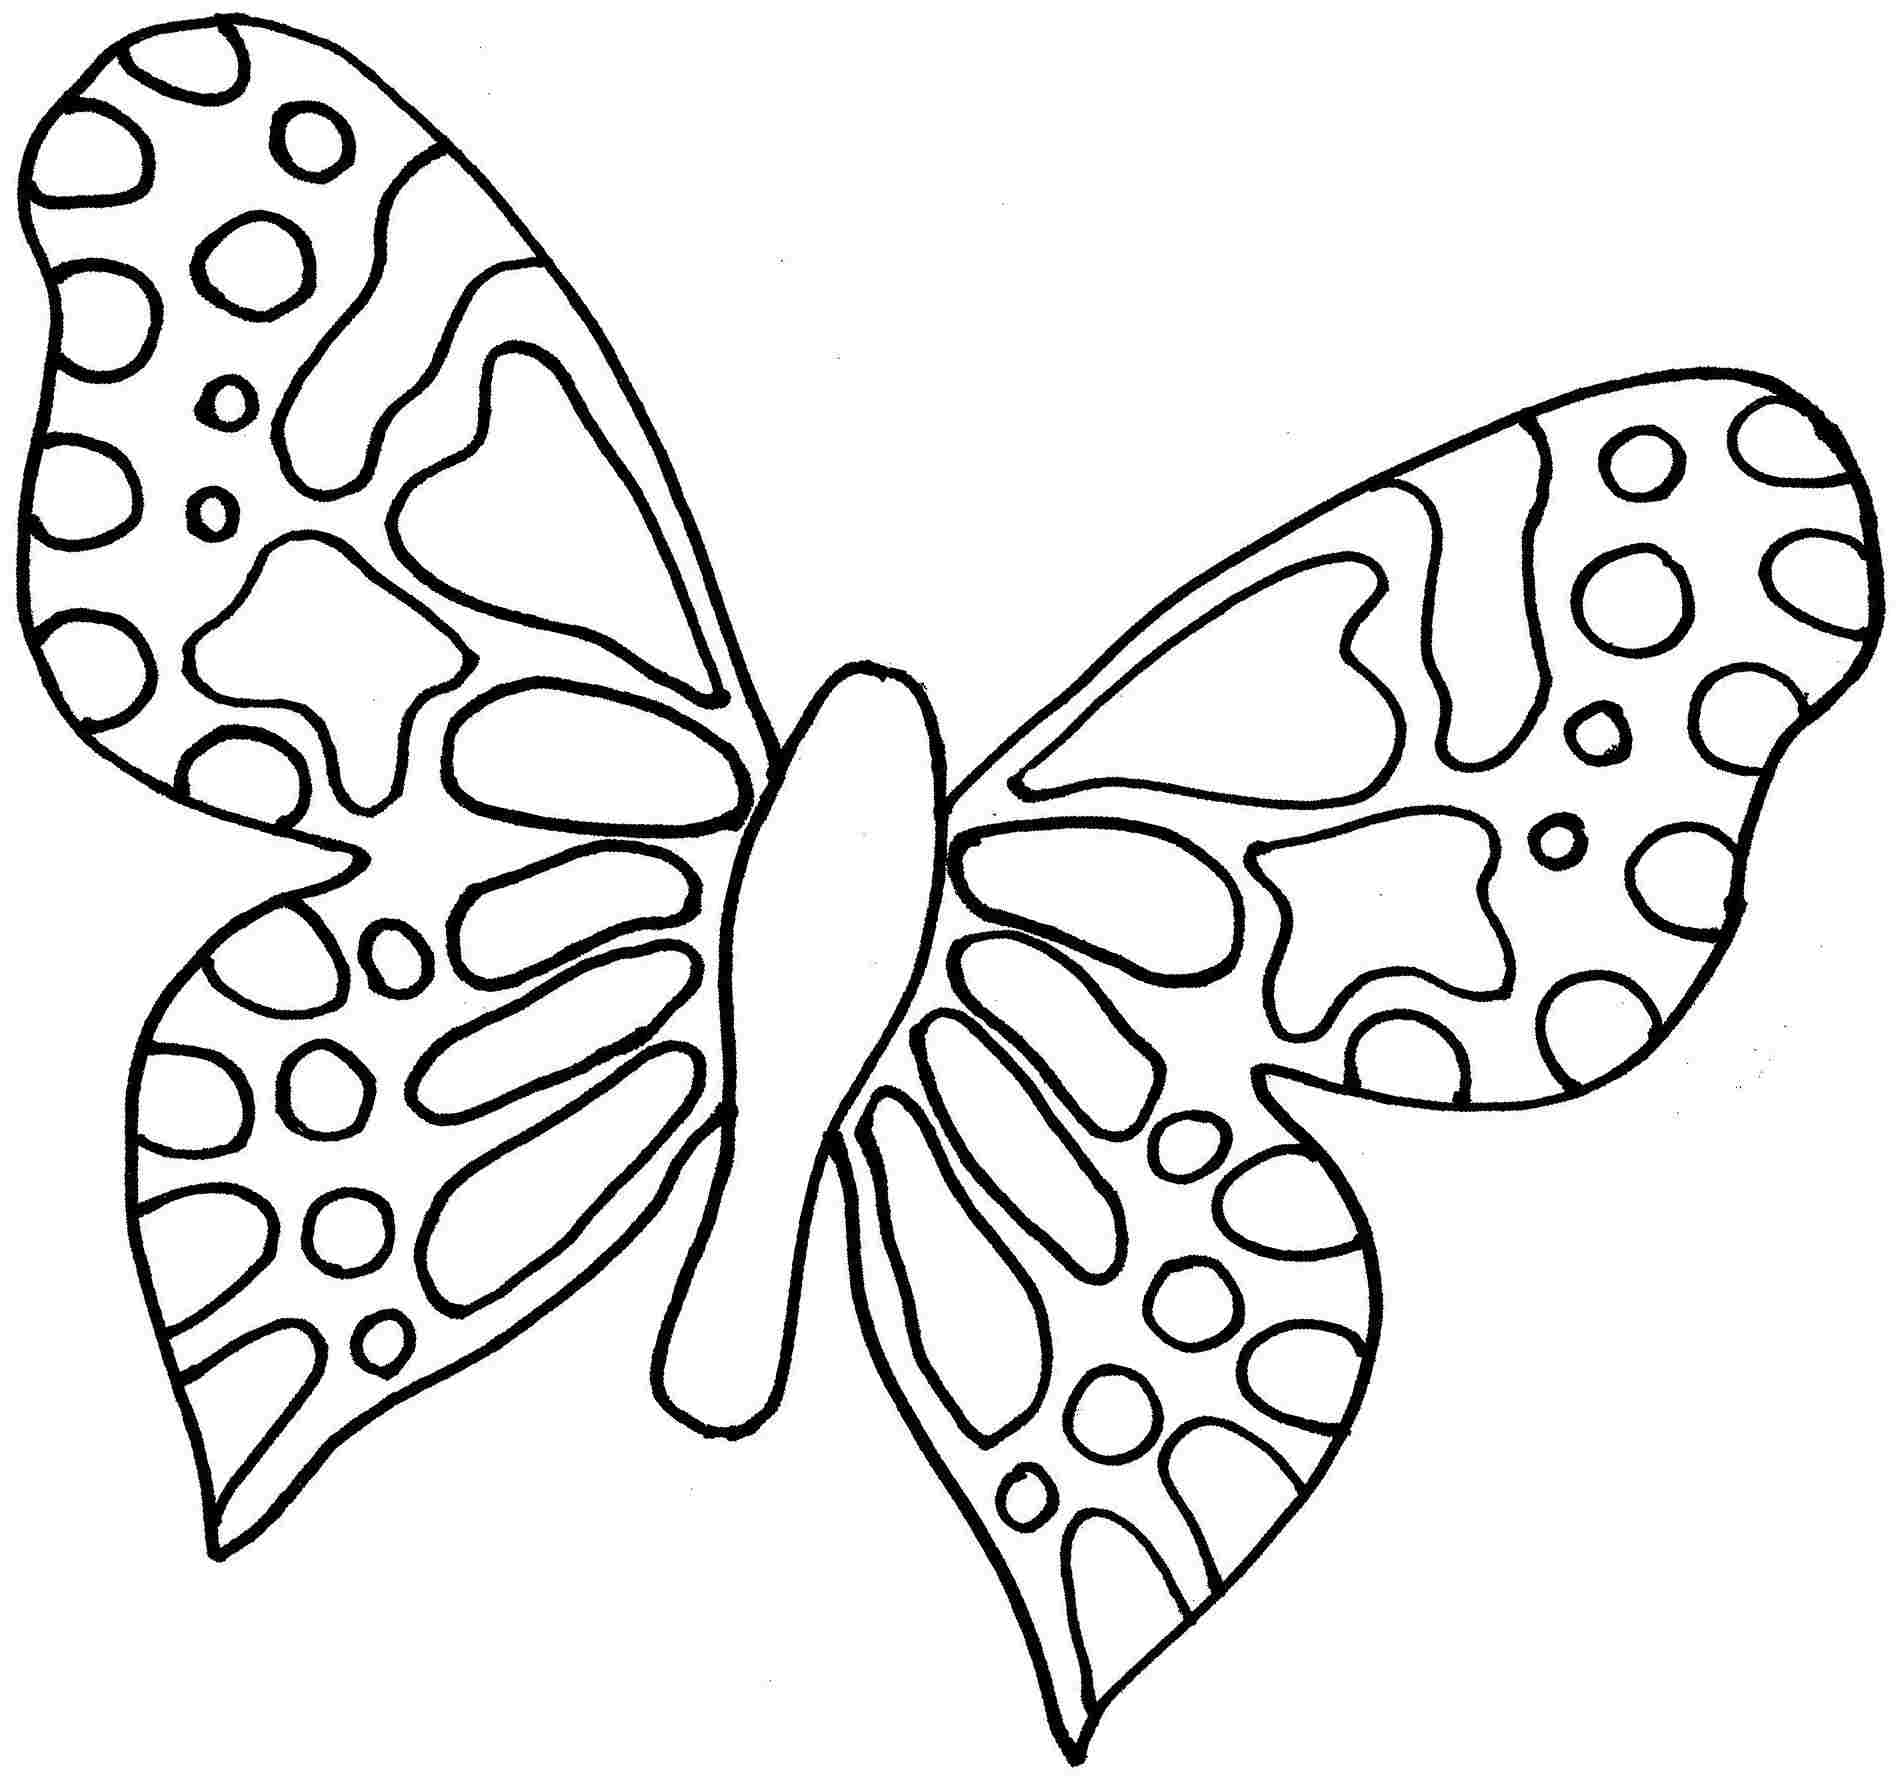 Animal Butterfly Colouring Sheets Printable Free For Kindergarten ...